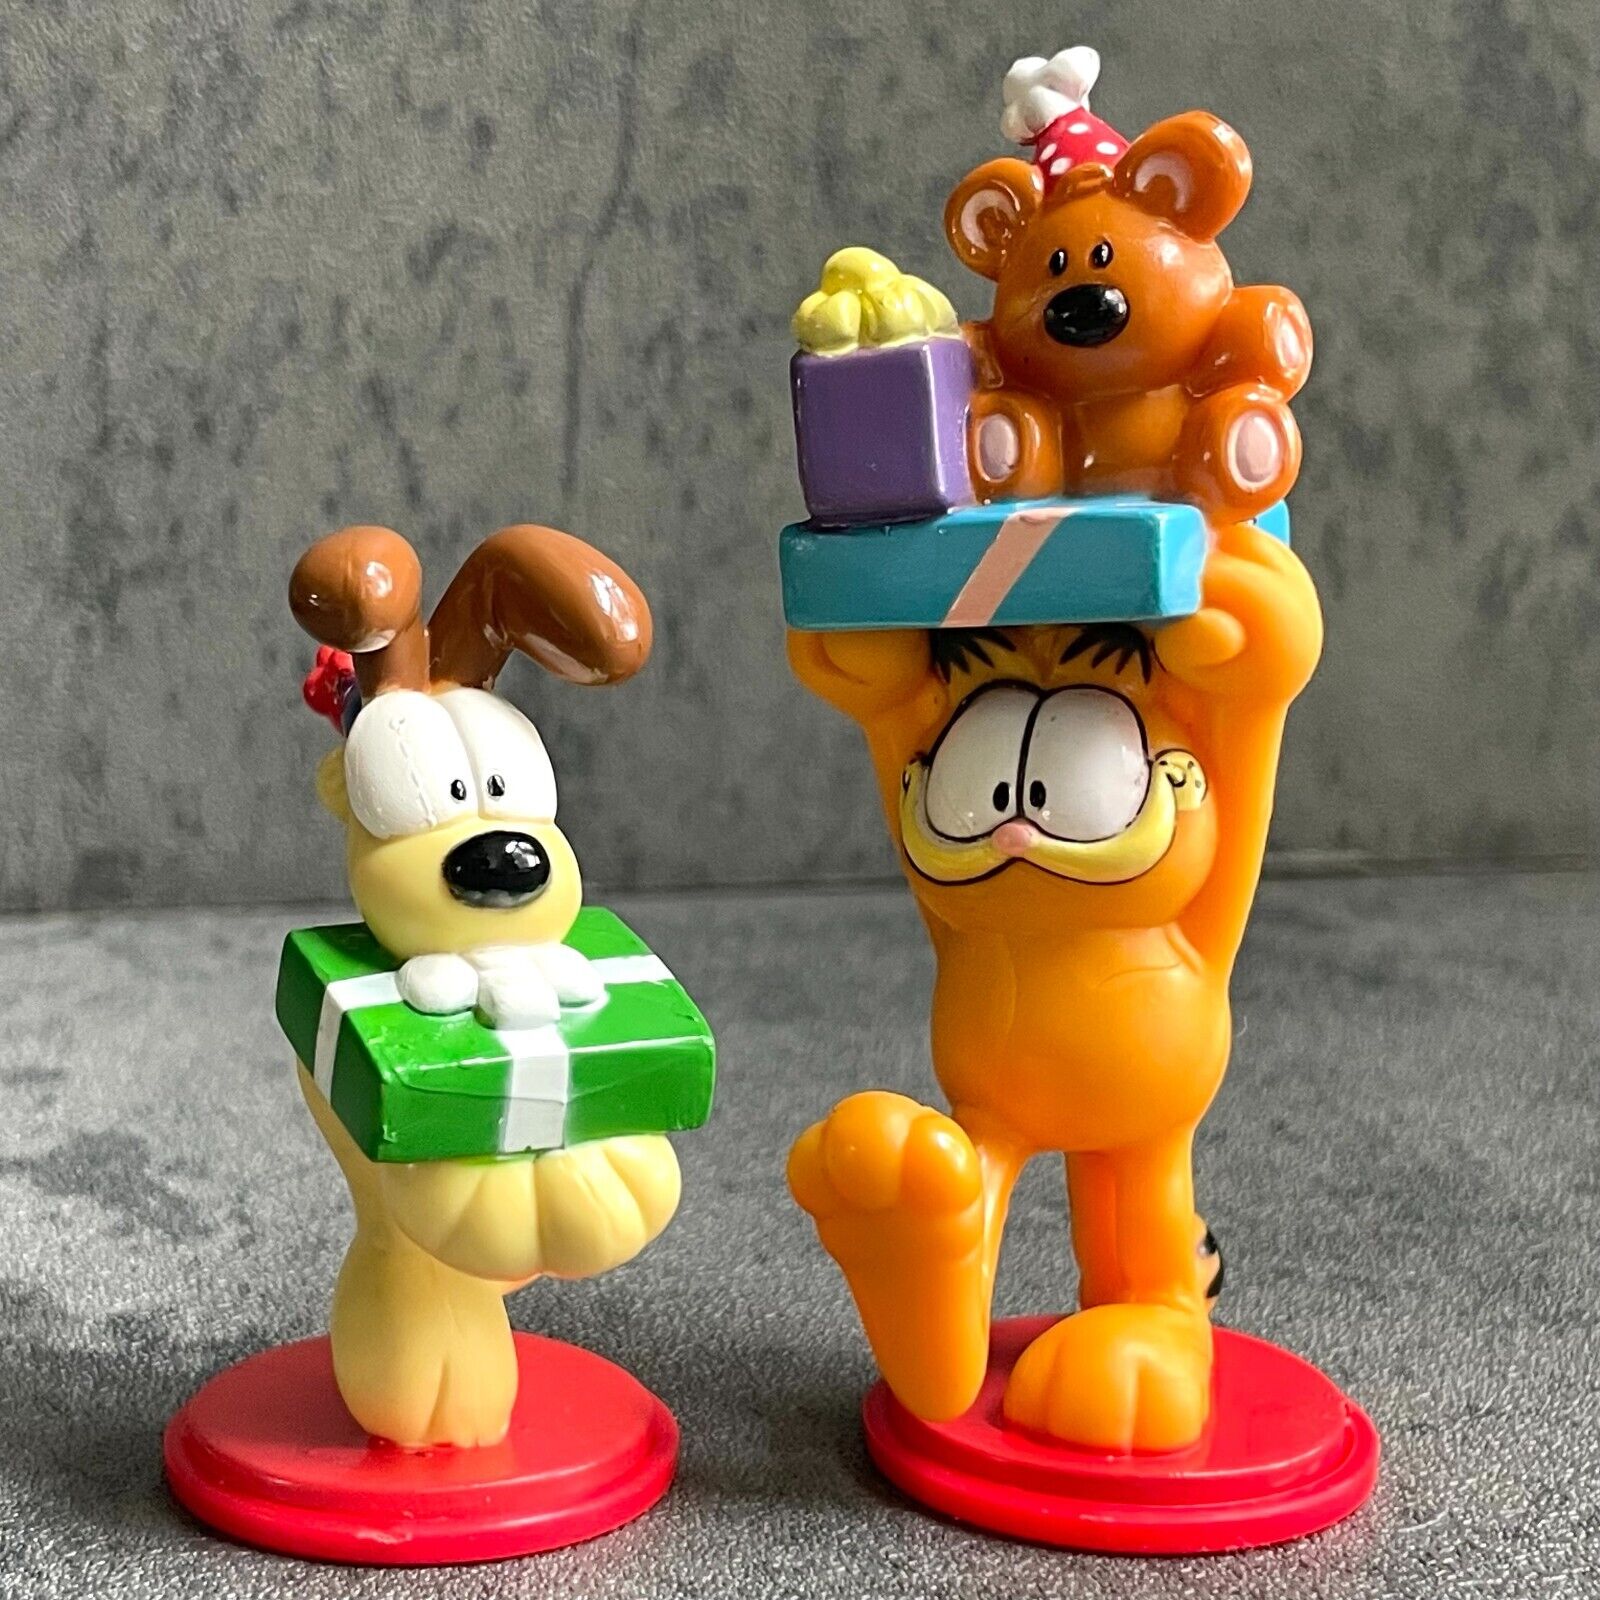 2-pc, Vintage Garfield & Odie PVC Figure Russ PAWS Cake Topper Birthday Gift NEW